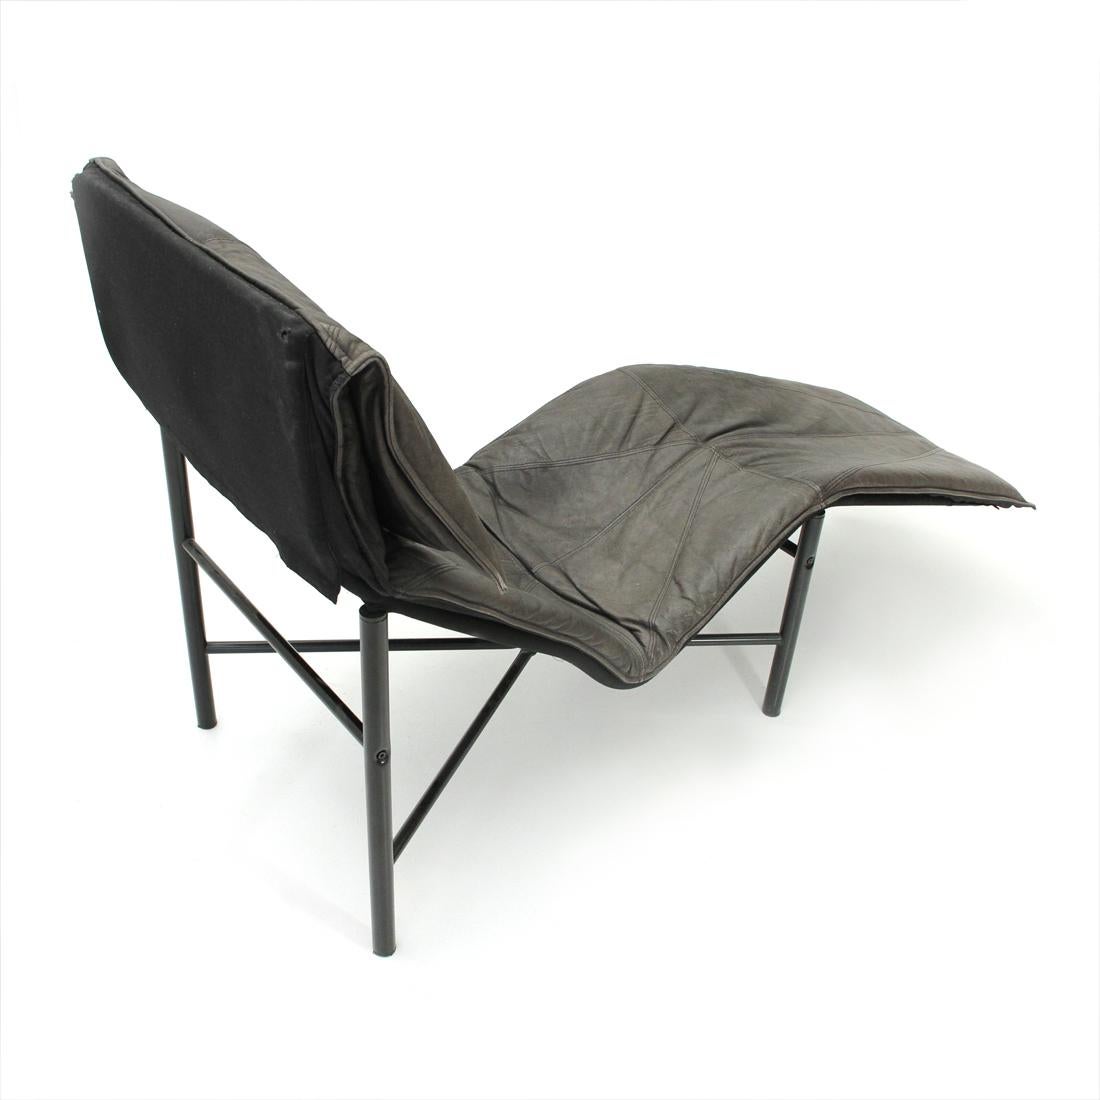 Swedish Skye Leather Chaise Longue by Tord Björklund for Ikea